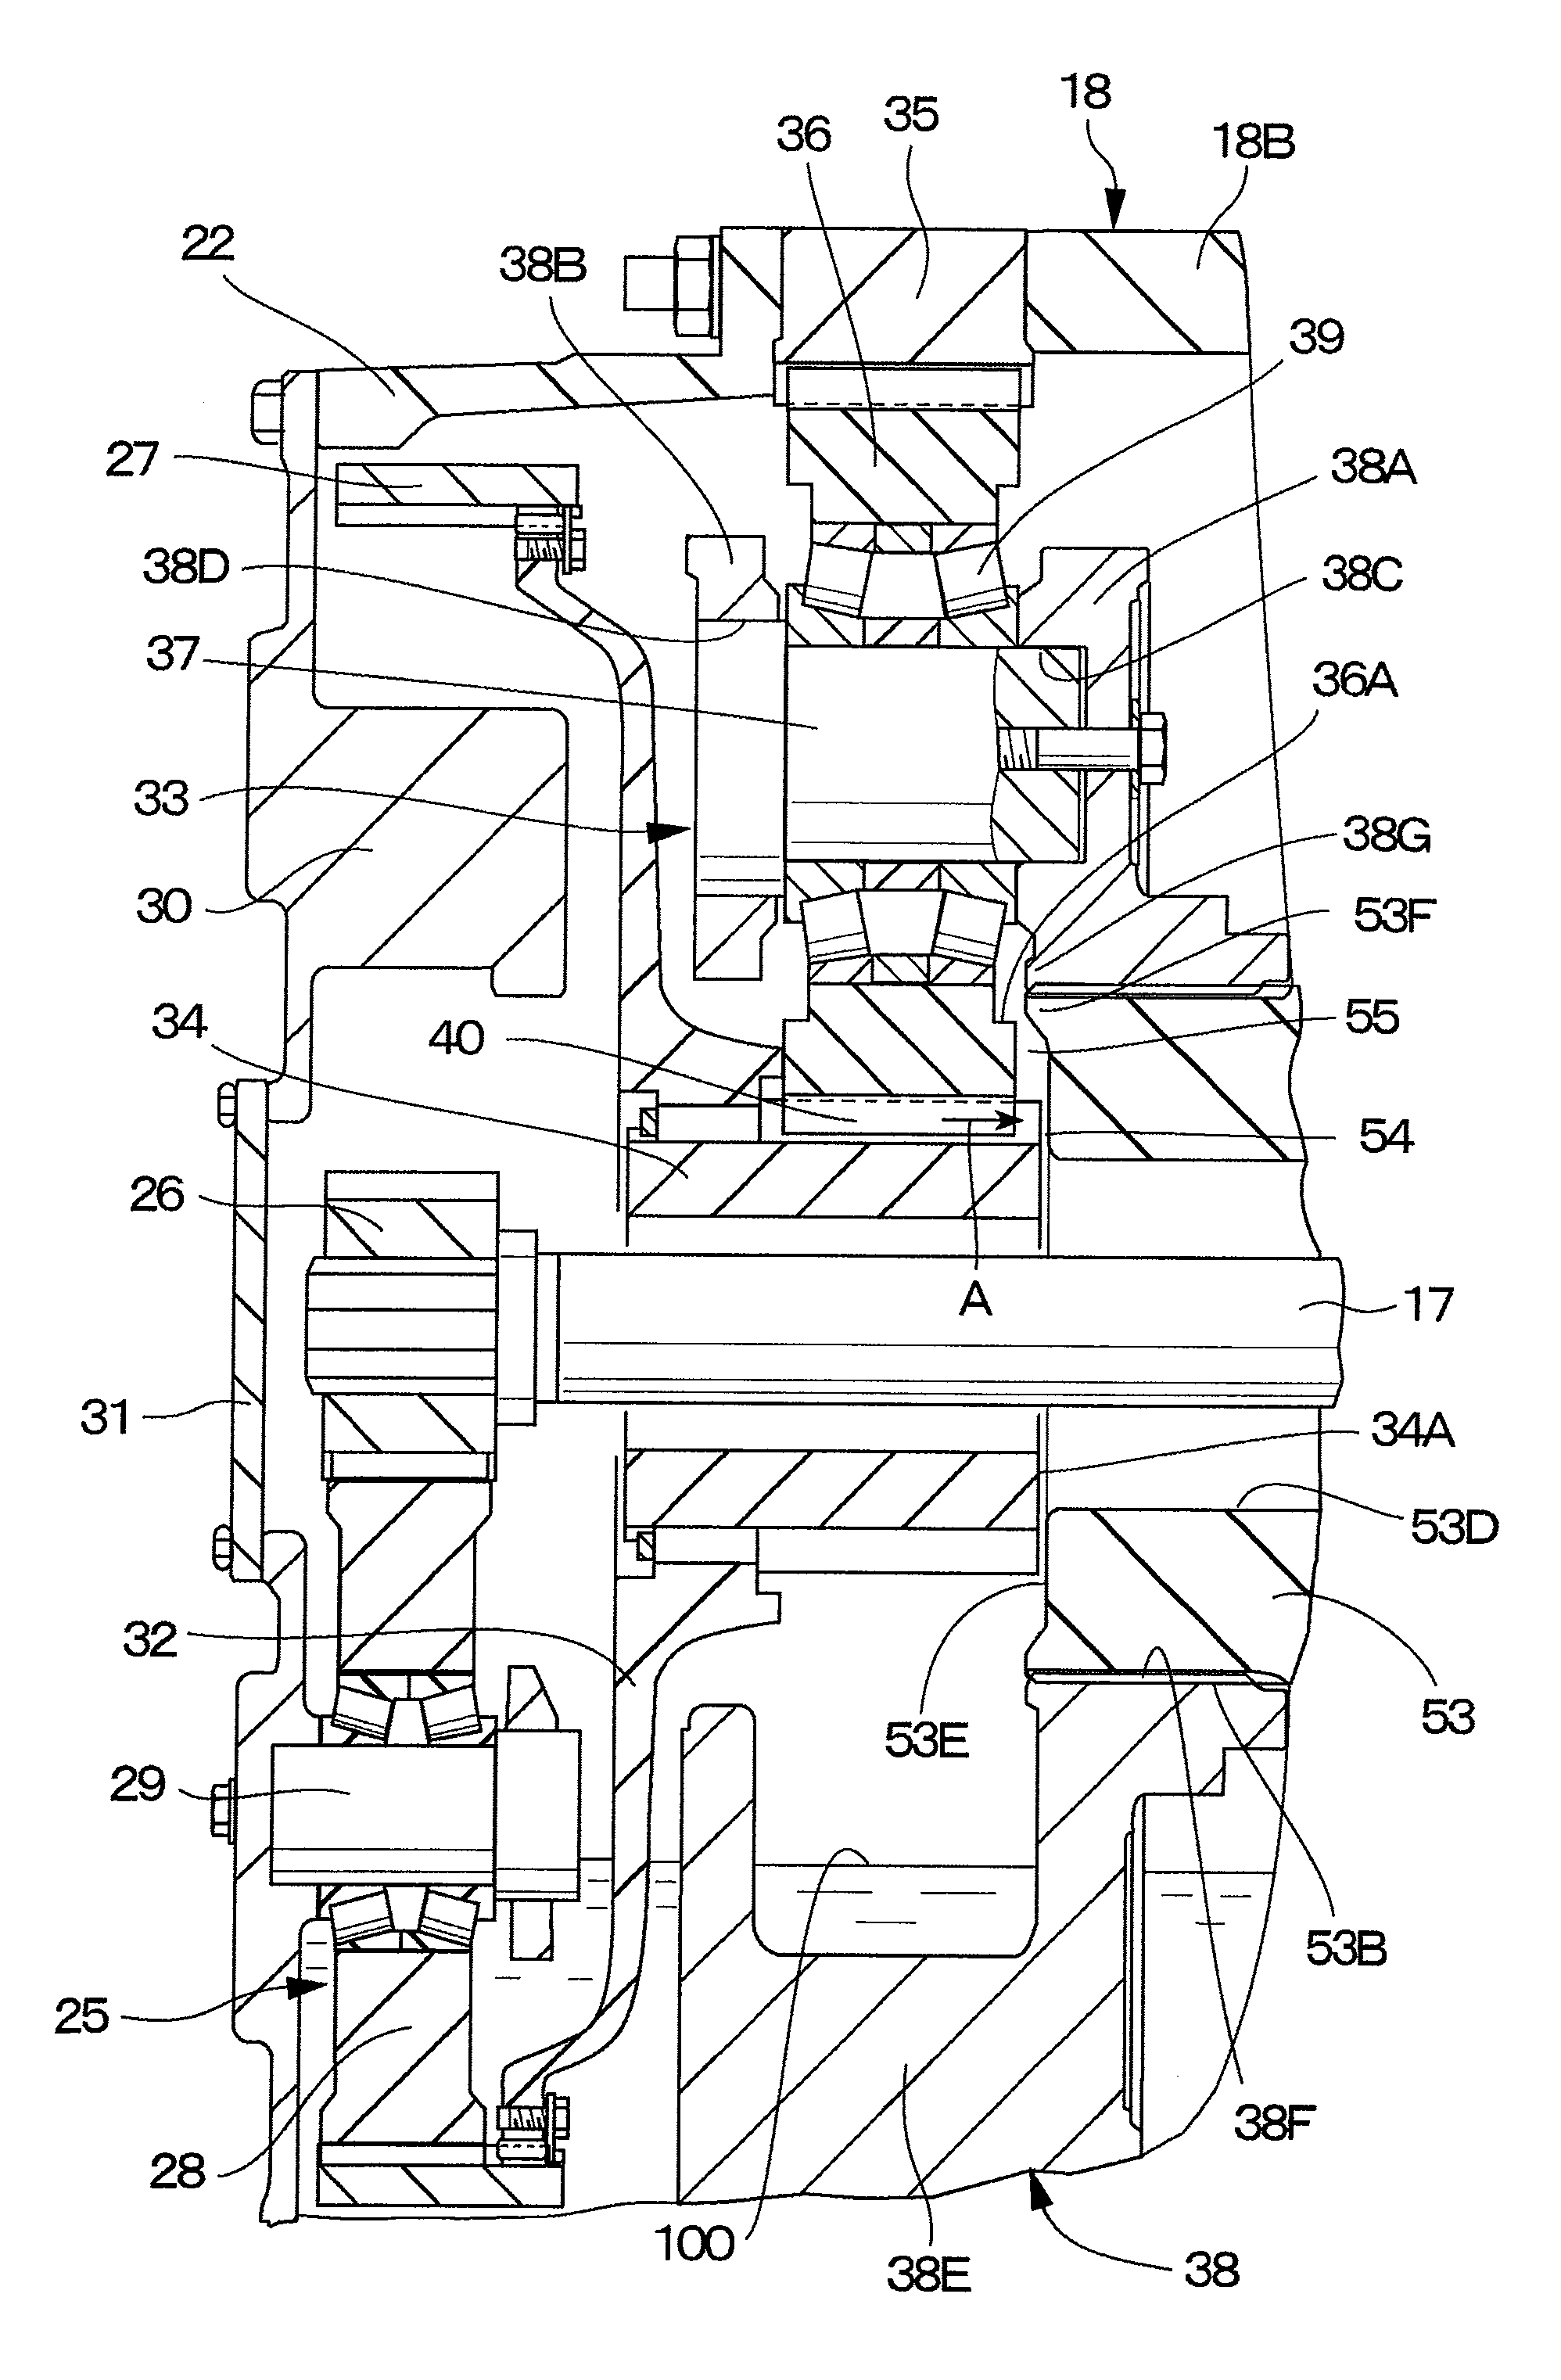 Travel drive device for dump truck